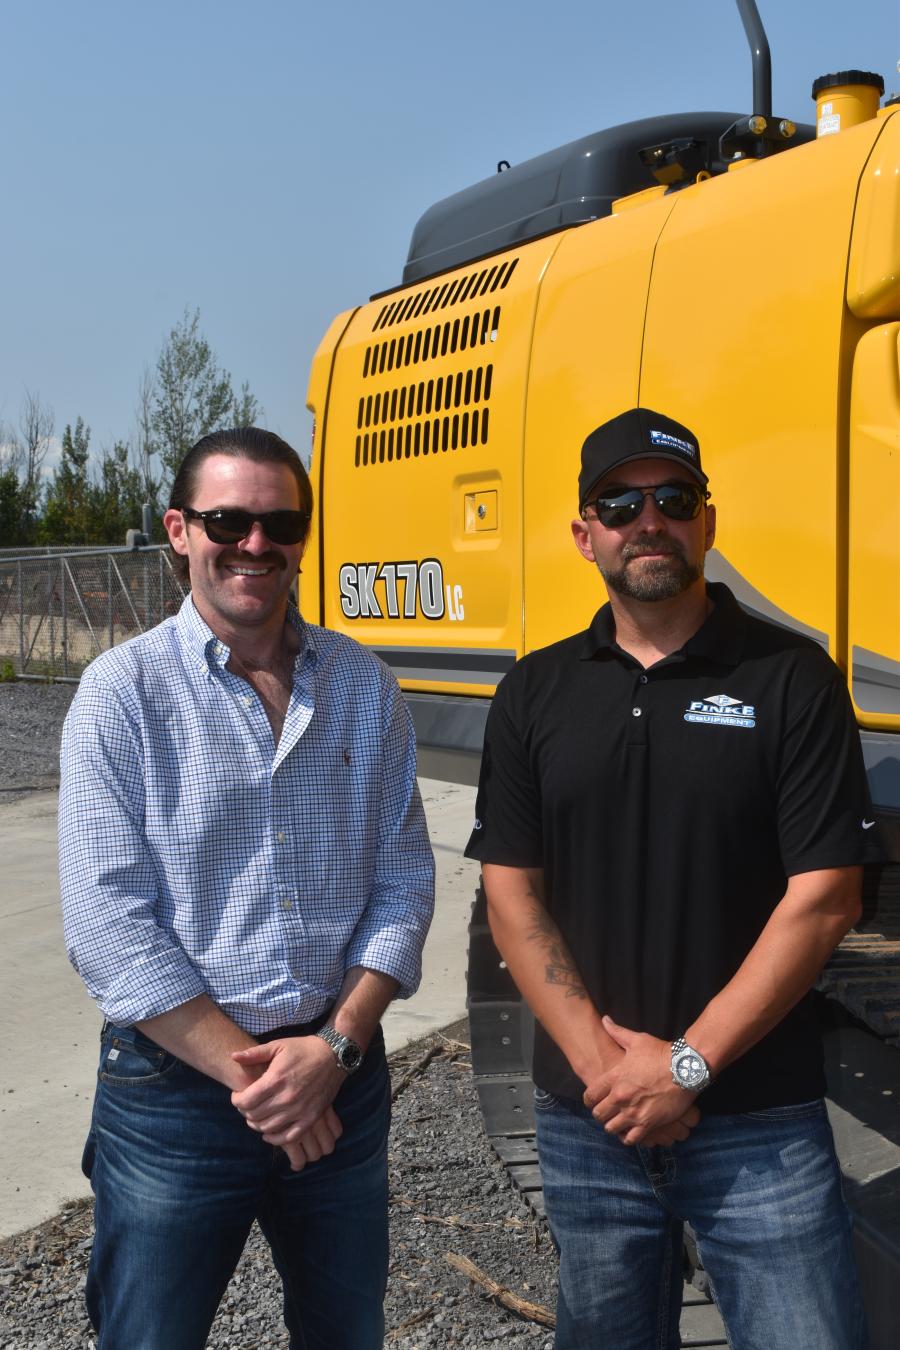 Don Fiacco (R) takes a moment to catch up with one of the Capital Region’s leading contractors: Chris Distefano, chief operating officer of Harrison & Burrowes.
(CEG photo)